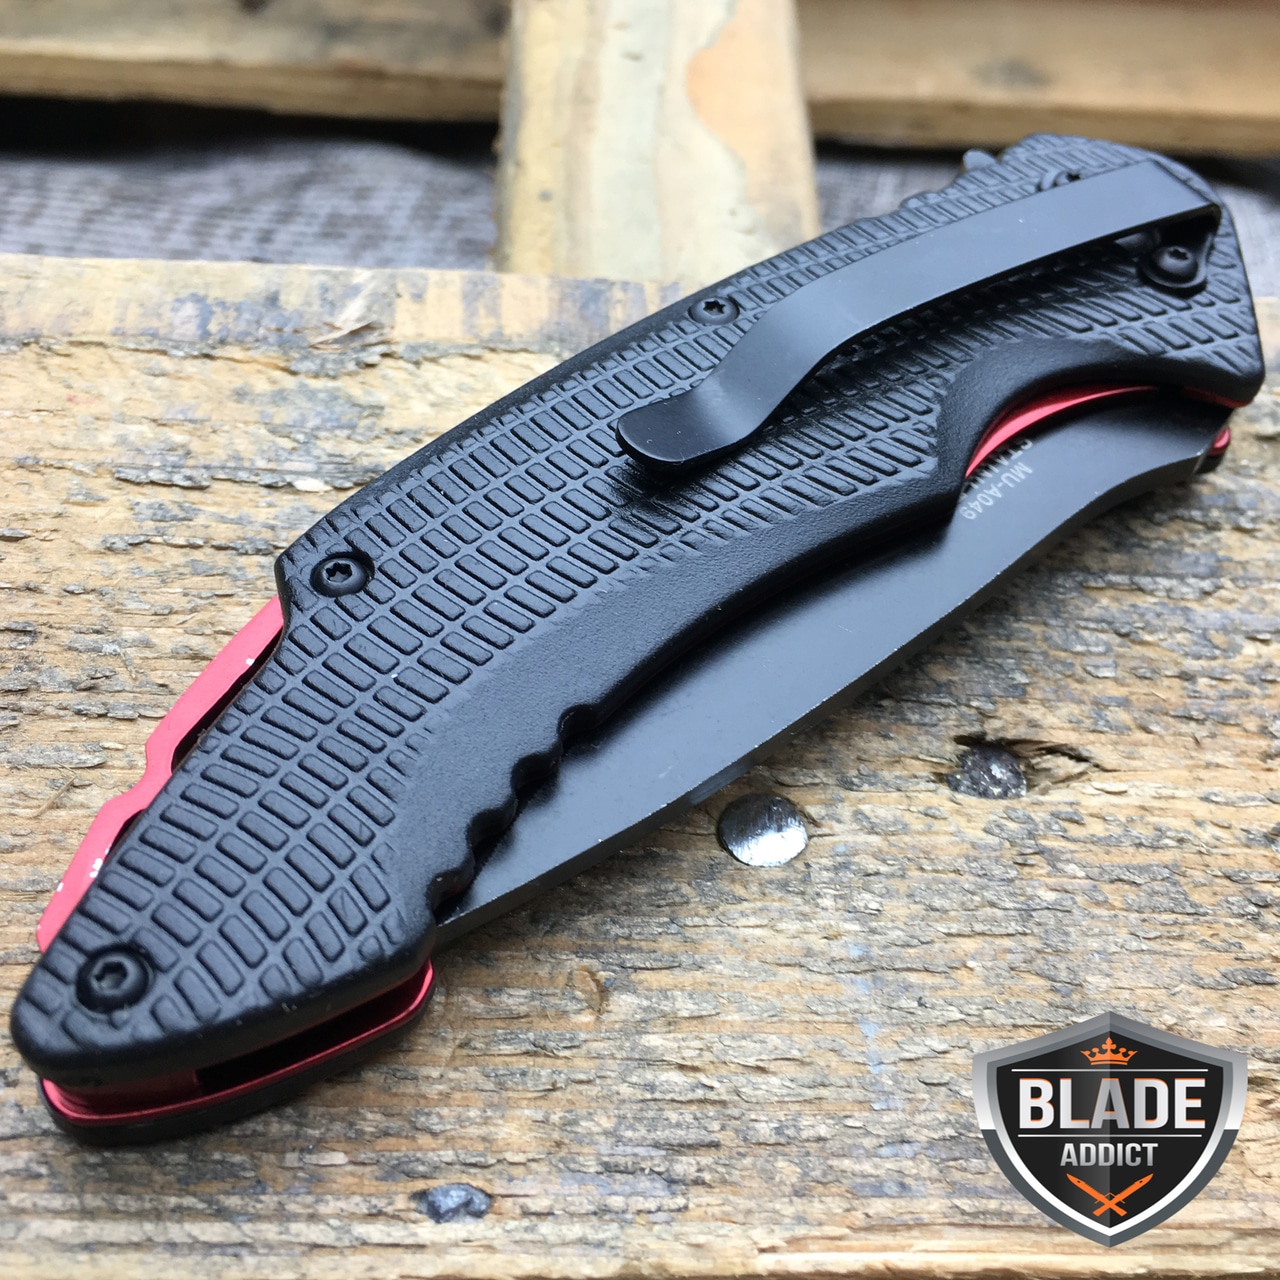 8.25" MASTER USA TACTICAL FOLDING SPRING ASSISTED KNIFE Blade Pocket Open RED